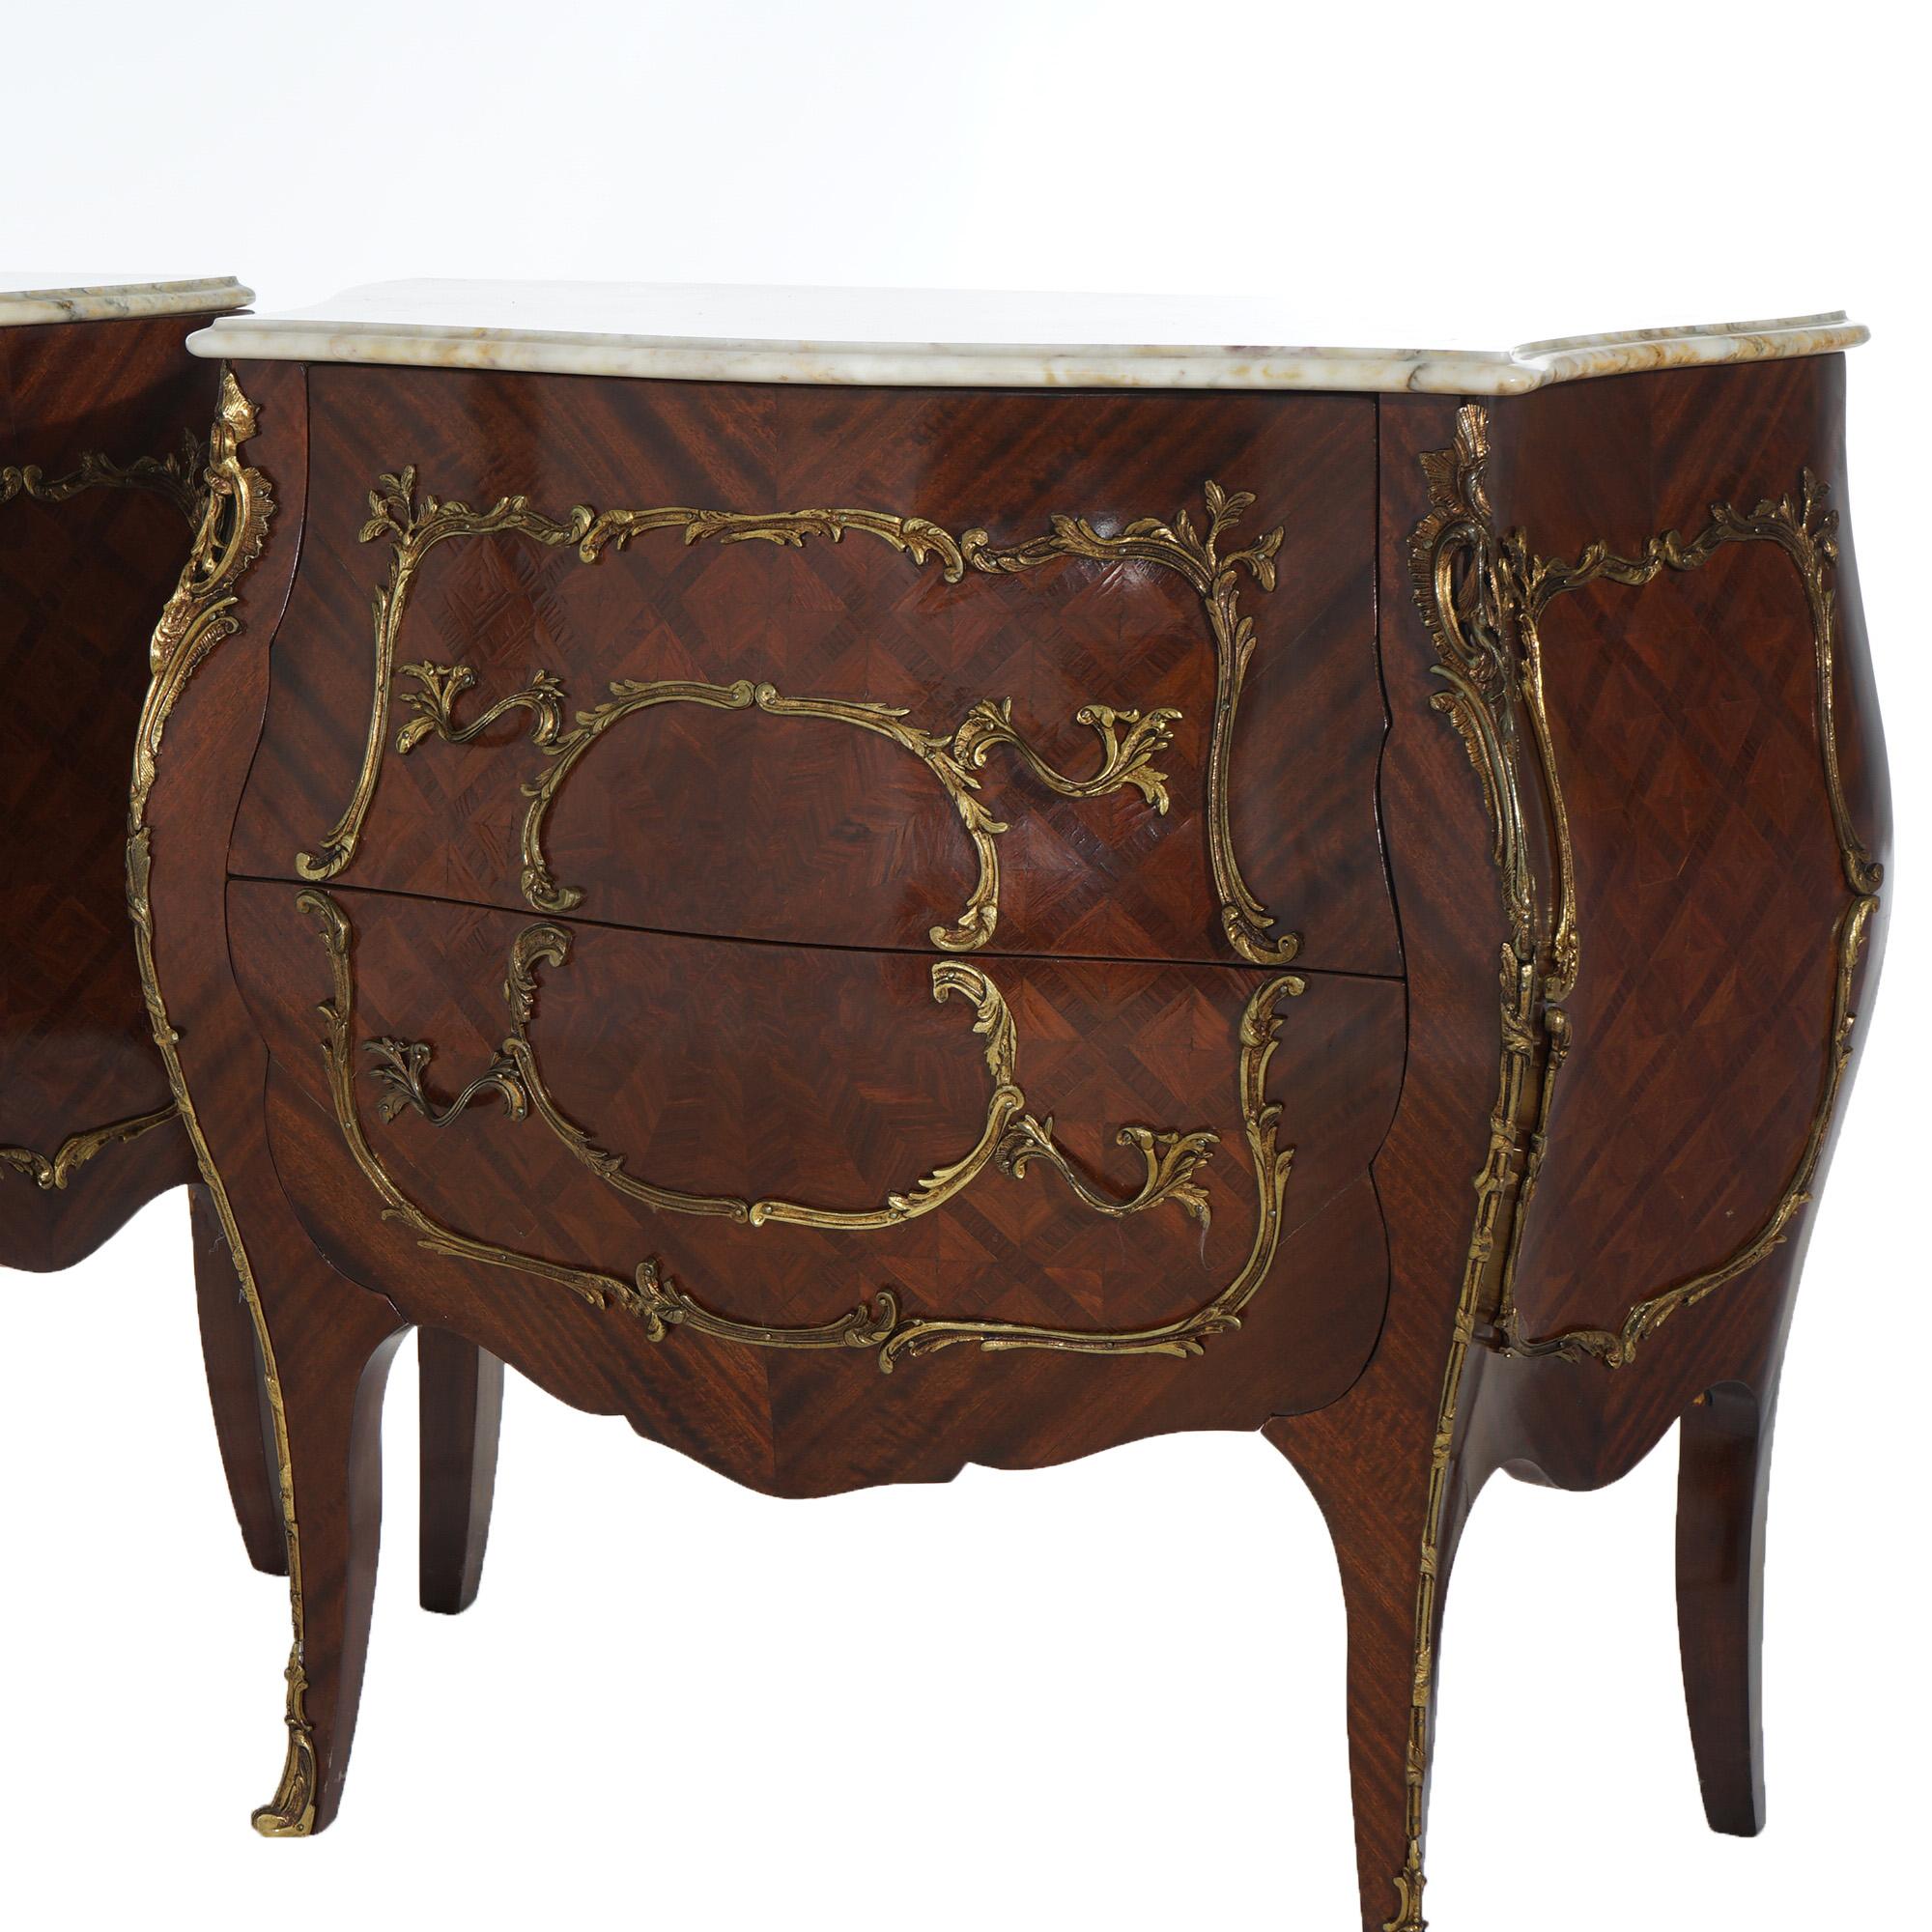 ***Ask About Reduced In-House Shipping Rates - Reliable Service & Fully Insured***

A matching pair of French Louis XIV commodes offer shaped marble tops over bombe form cases with kingwood parquetry, foliate form ormolu, double drawers and raised